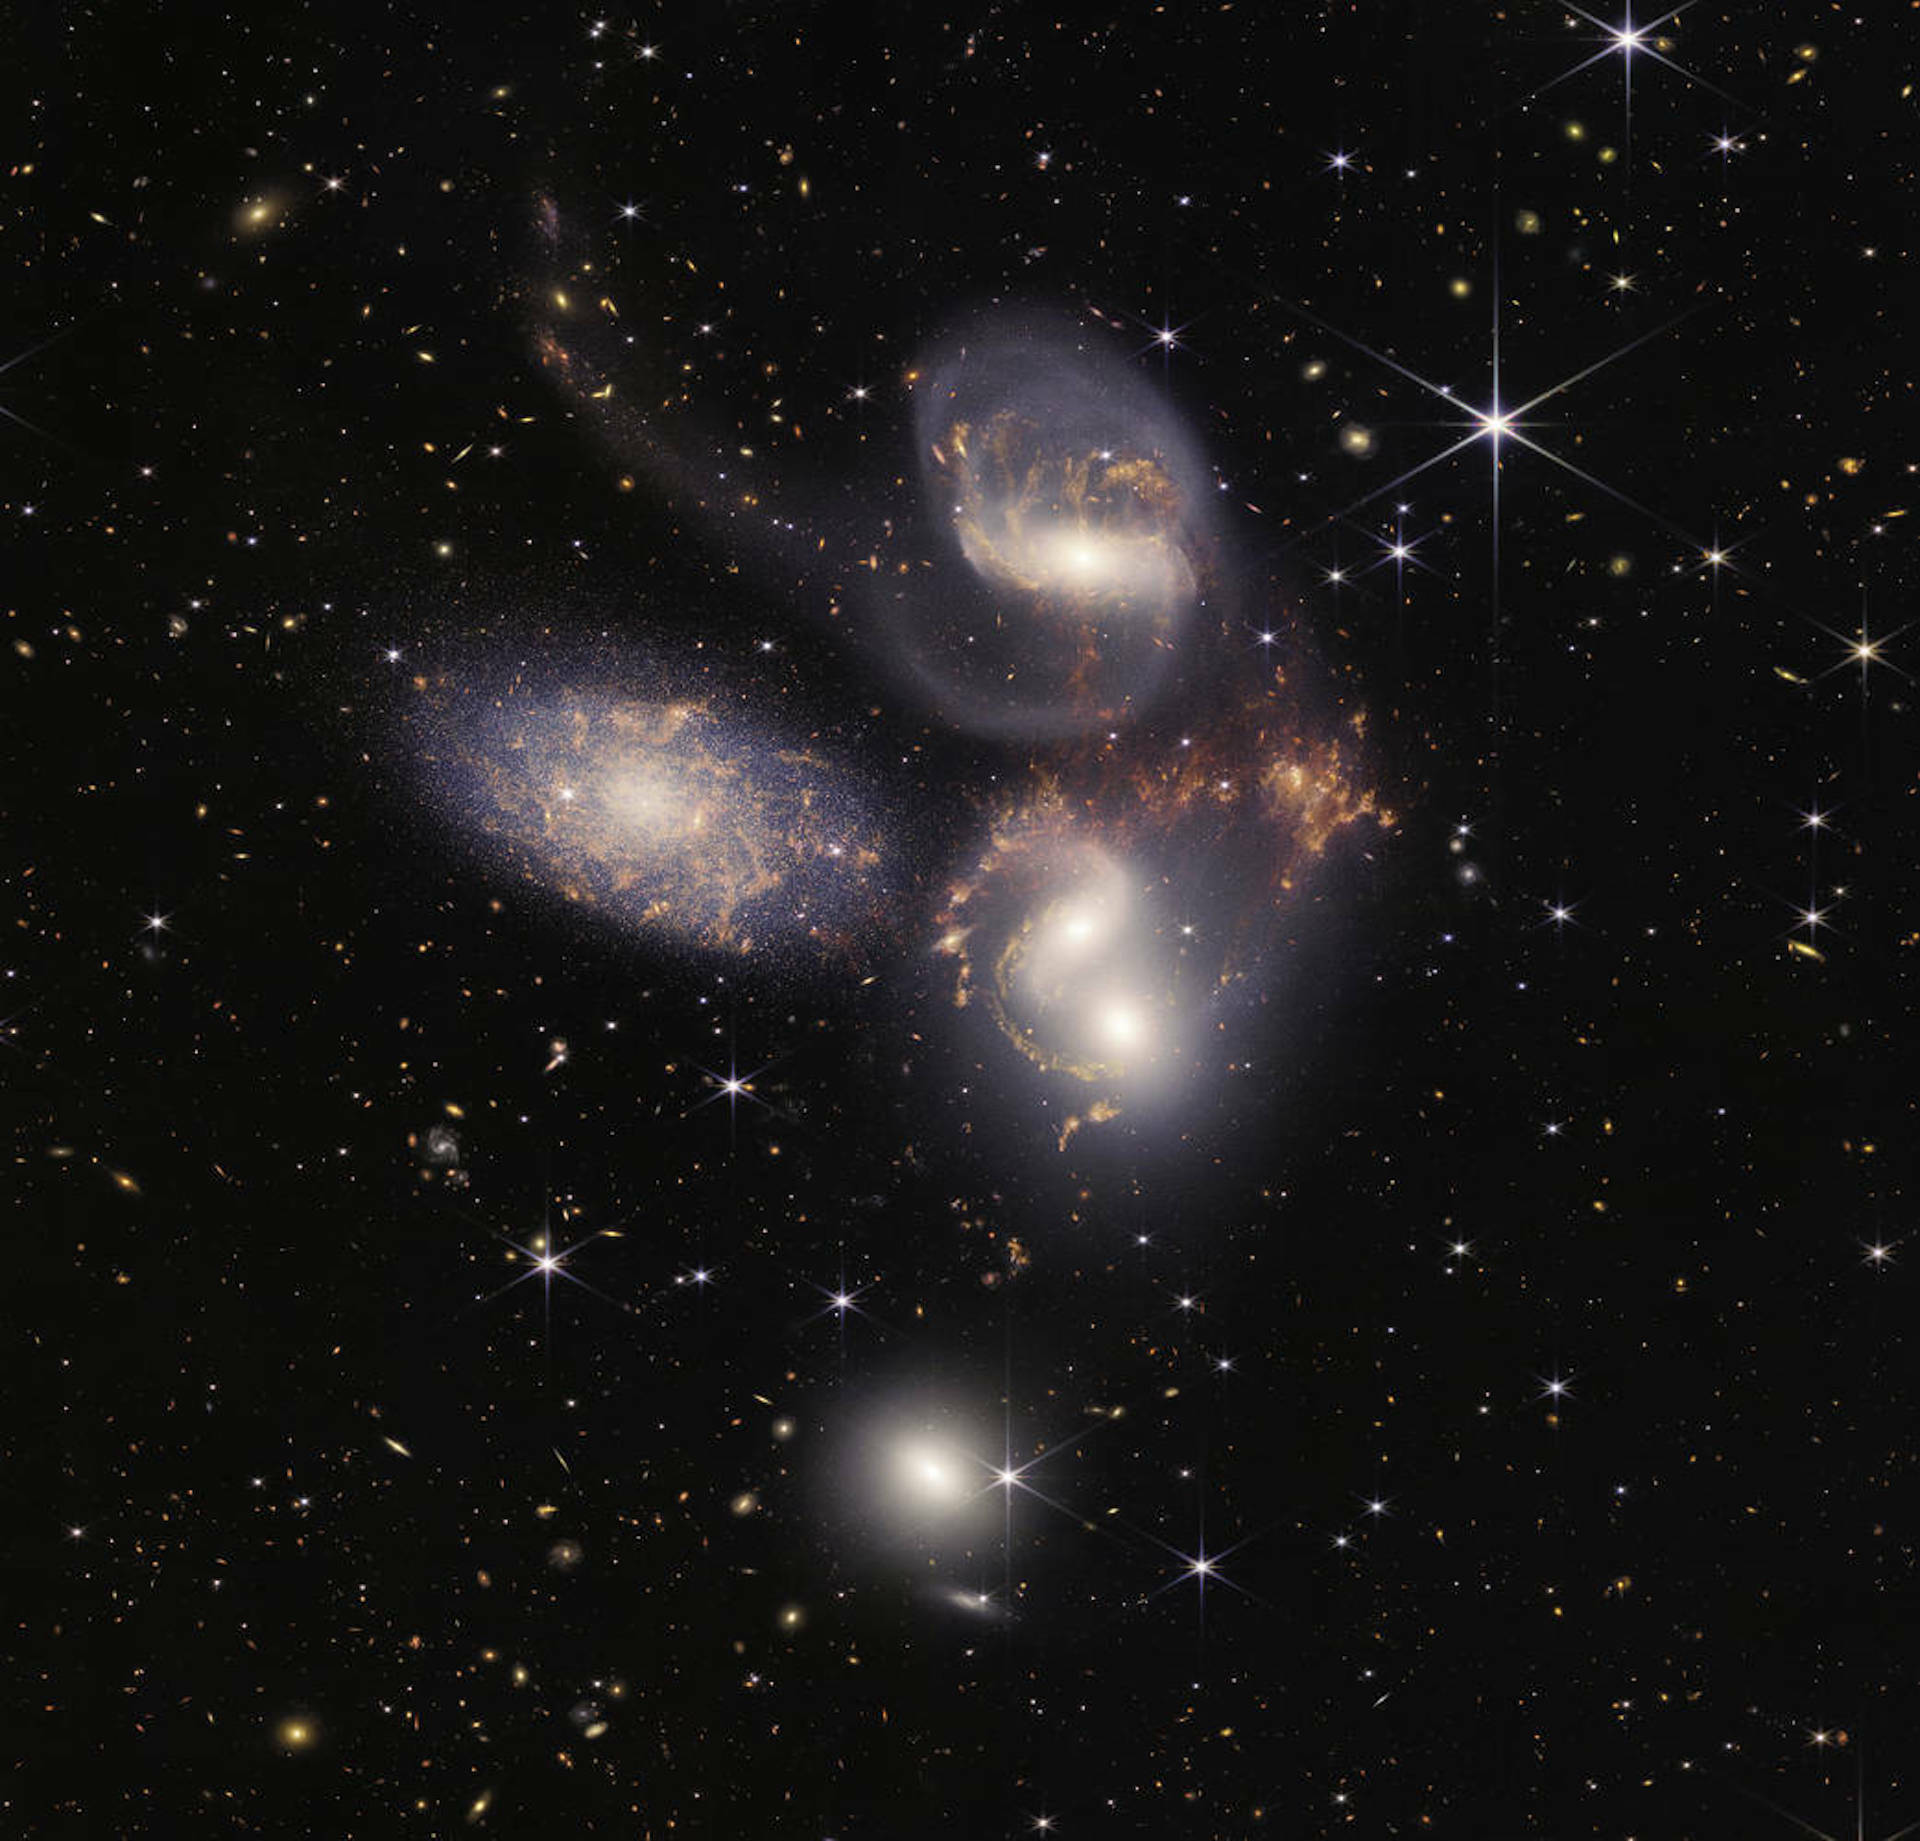 A collection of galaxies photographed close together by the James Webb Telescope.